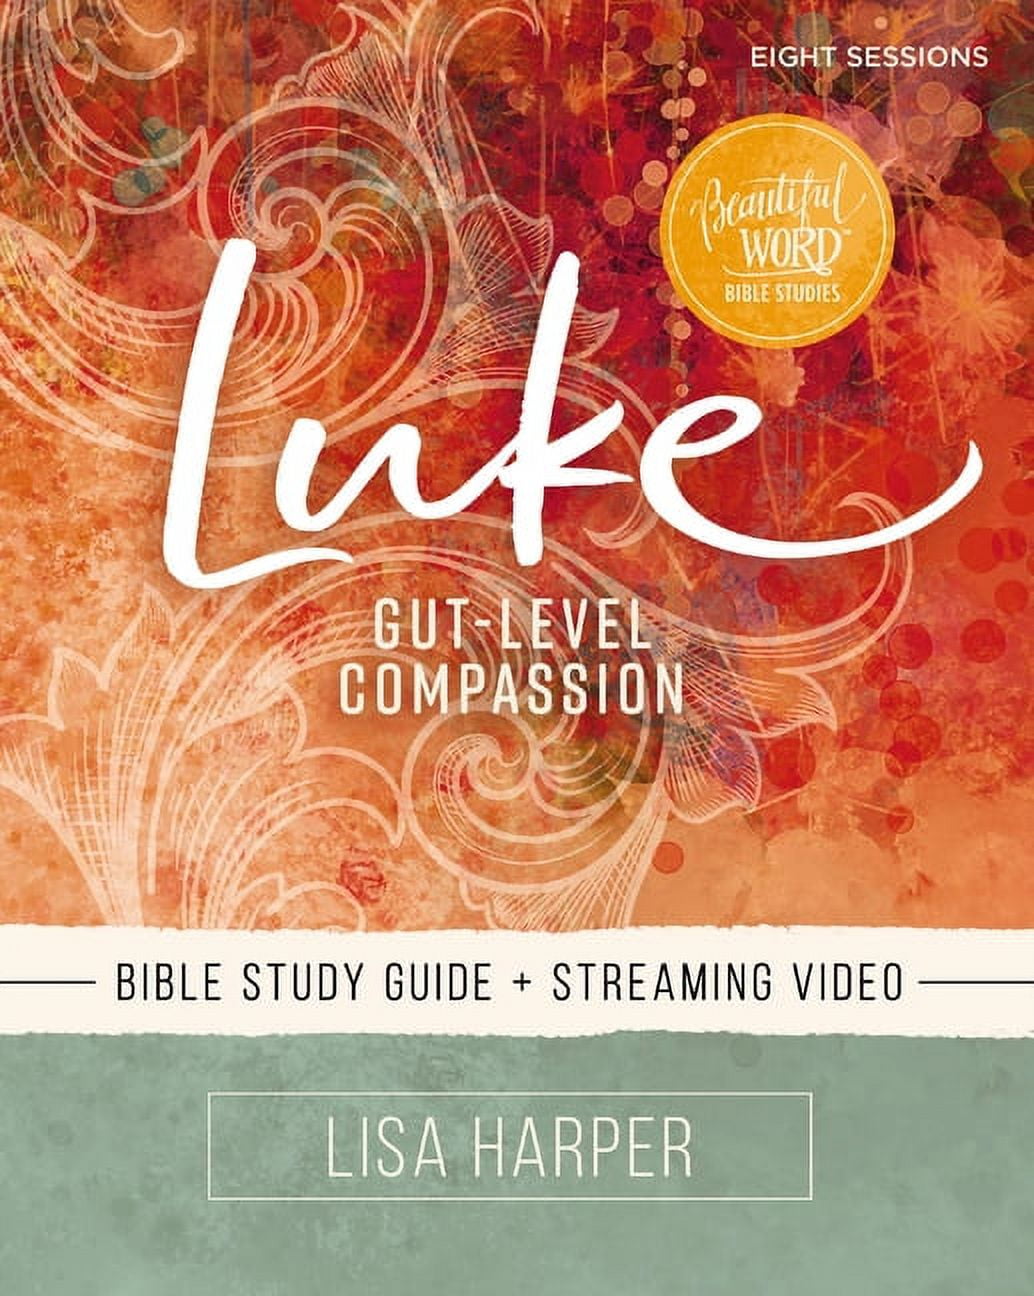 Beautiful Word Bible Studies Luke Bible Study Guide Plus Streaming Video Gut-Level Compassion (Paperback)